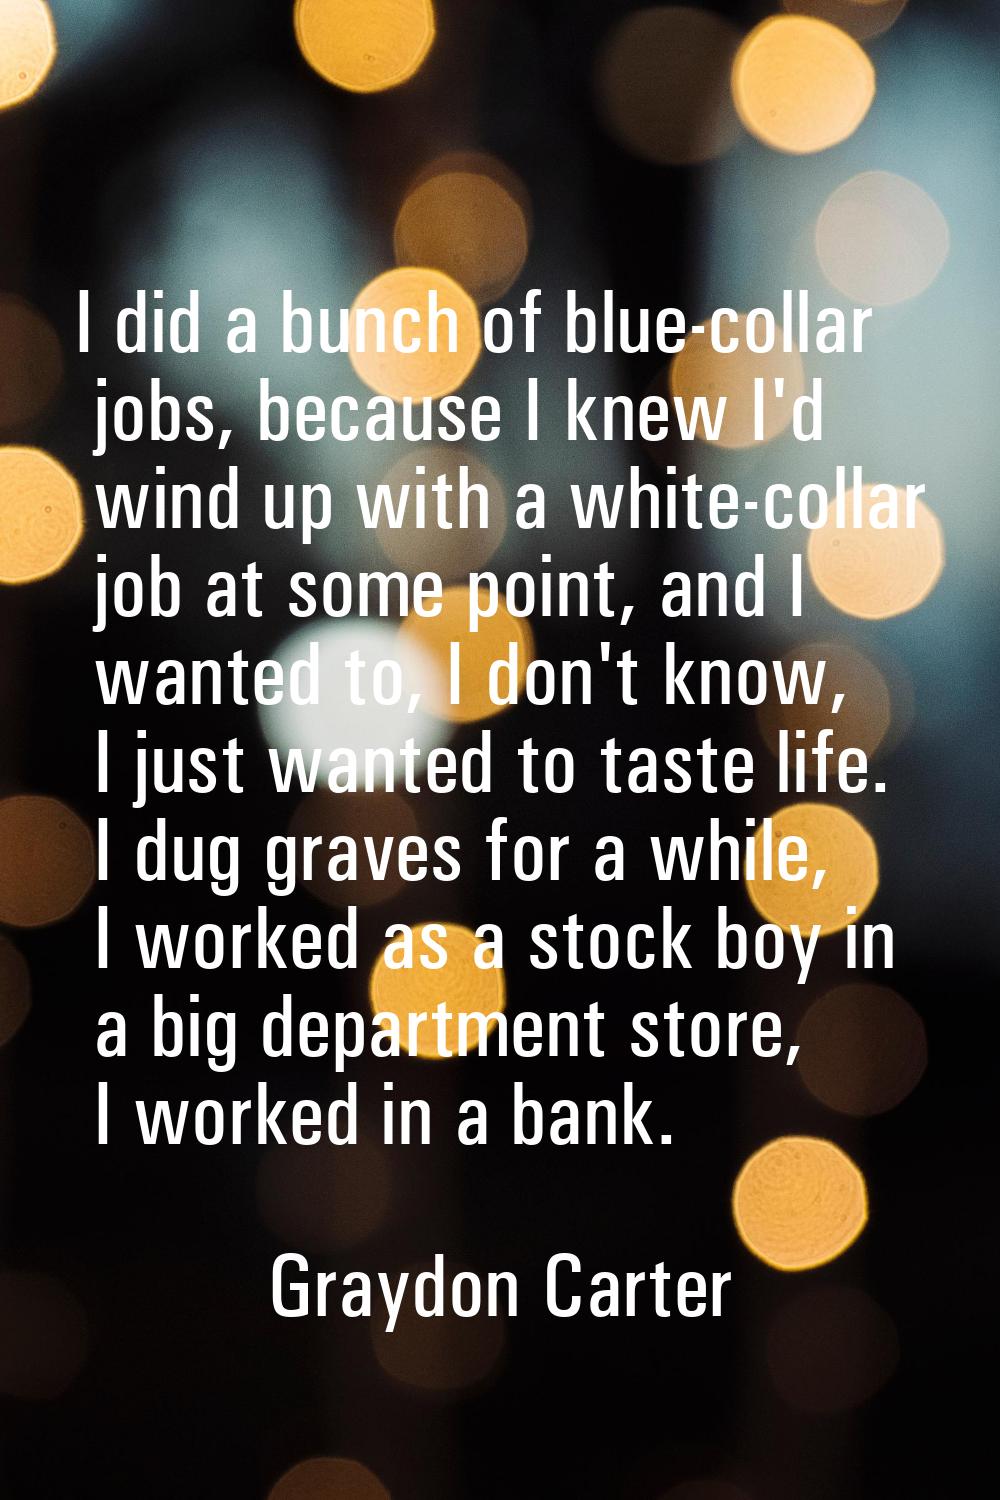 I did a bunch of blue-collar jobs, because I knew I'd wind up with a white-collar job at some point